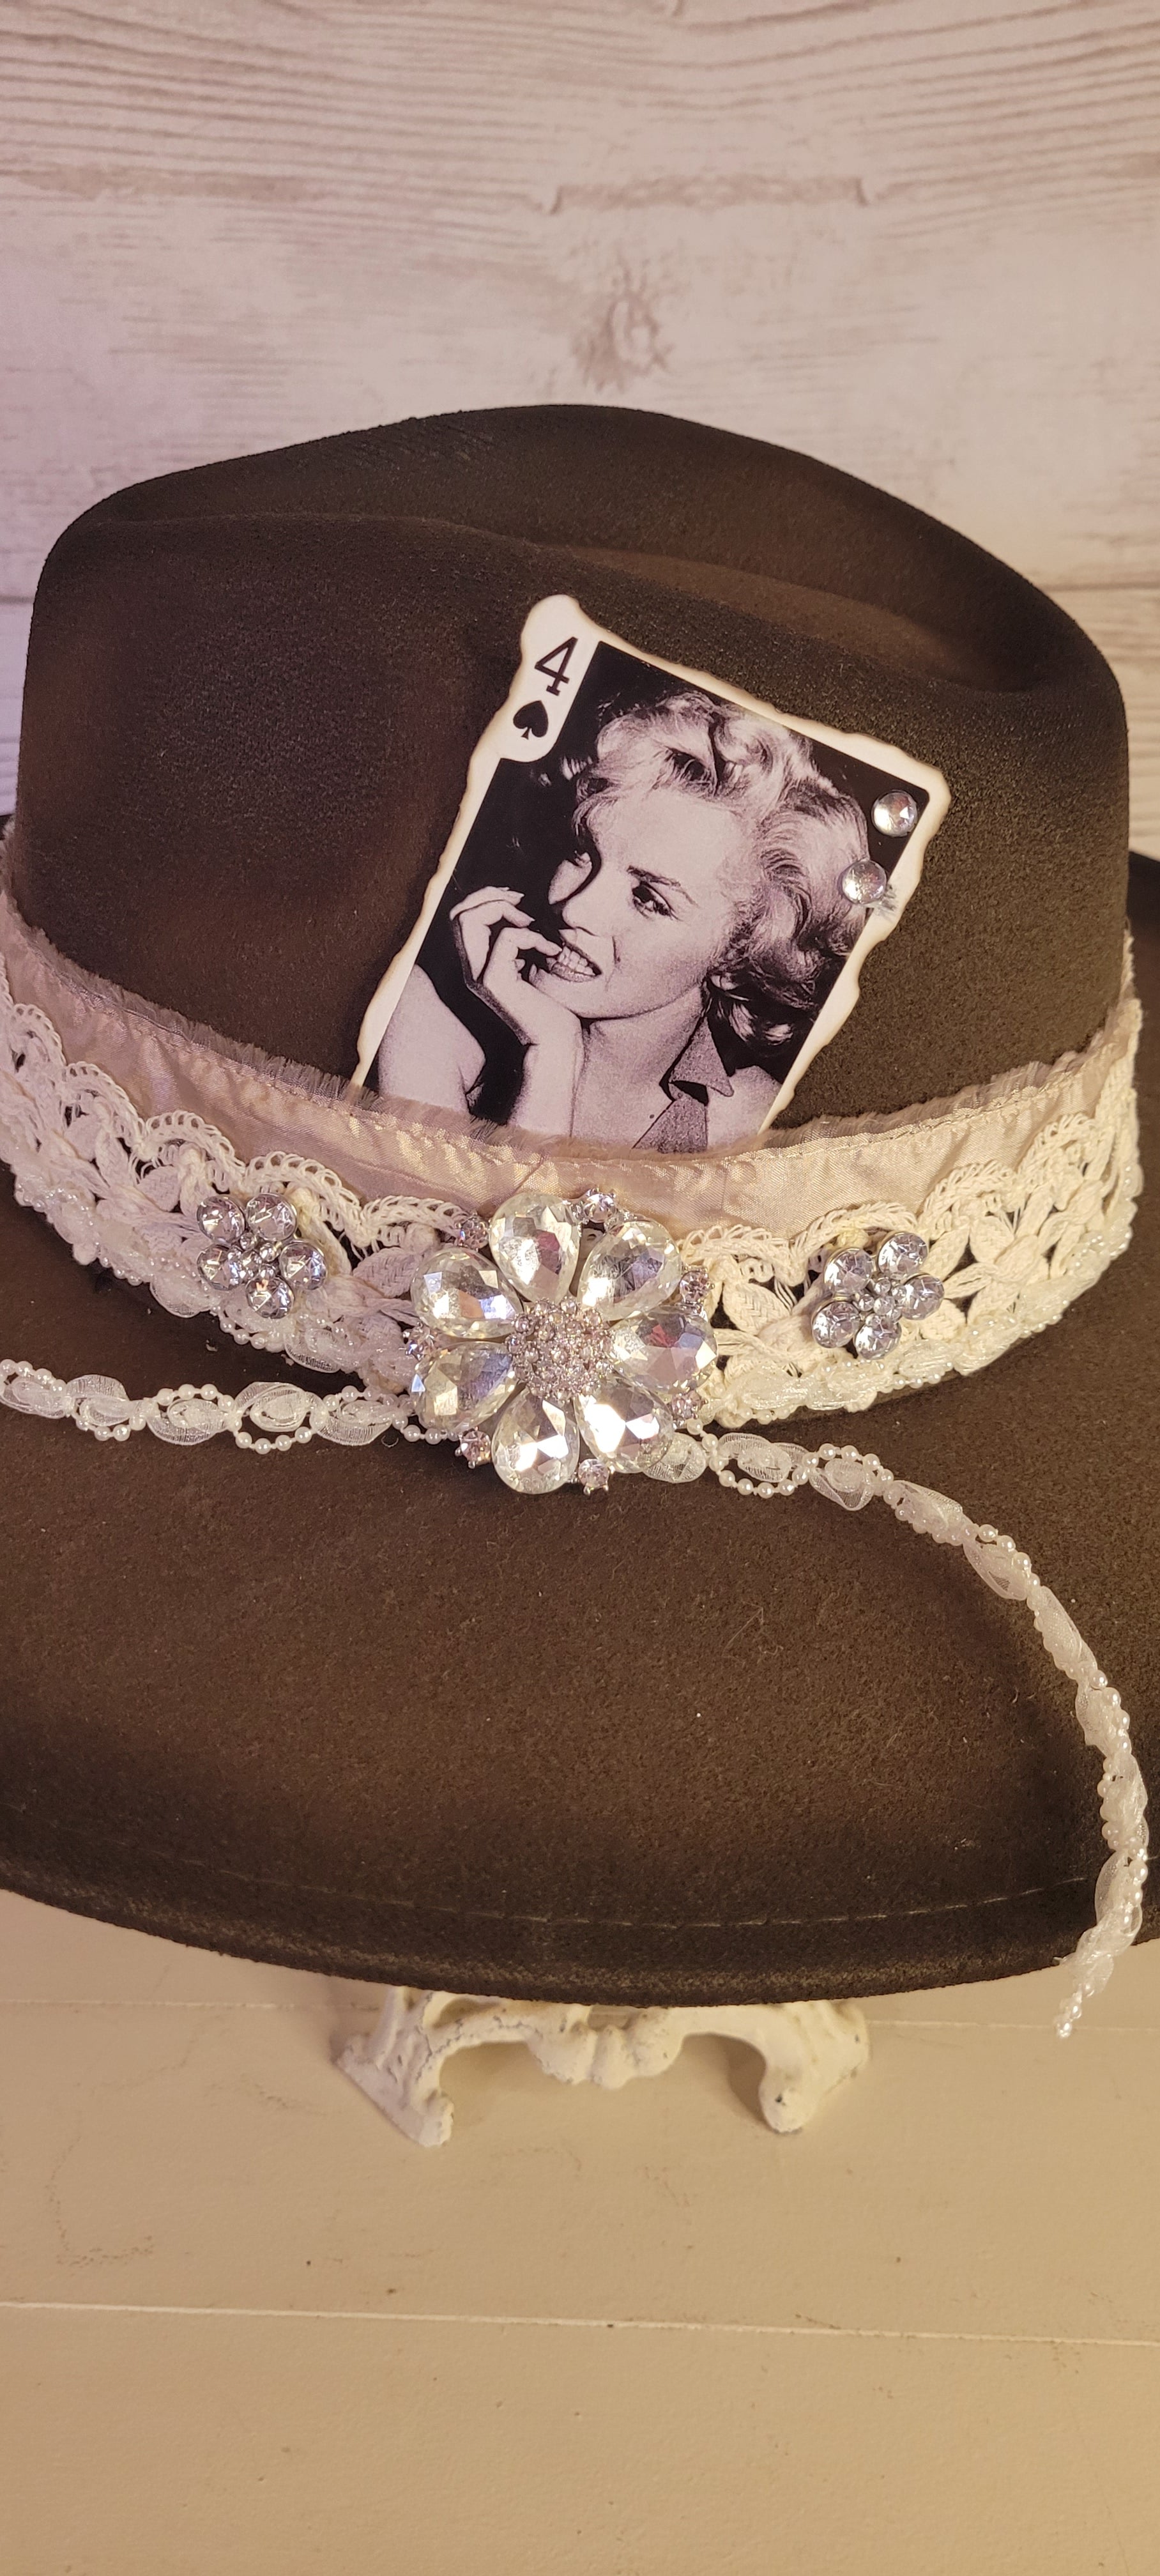 Features rhinestone details on brim, crystal brooches, & playing card, light rose ribbon, natural lace ribbon, pearl ribbon Felt hat Flat brim 65% polyester and 35% cotton Ribbon drawstring for hat size adjustment Head Circumference: 24" Crown Height: 5" Brim Length: 15.75" Brim Width: 14.5" Branded & numbered inside crown Custom designed by Kayla